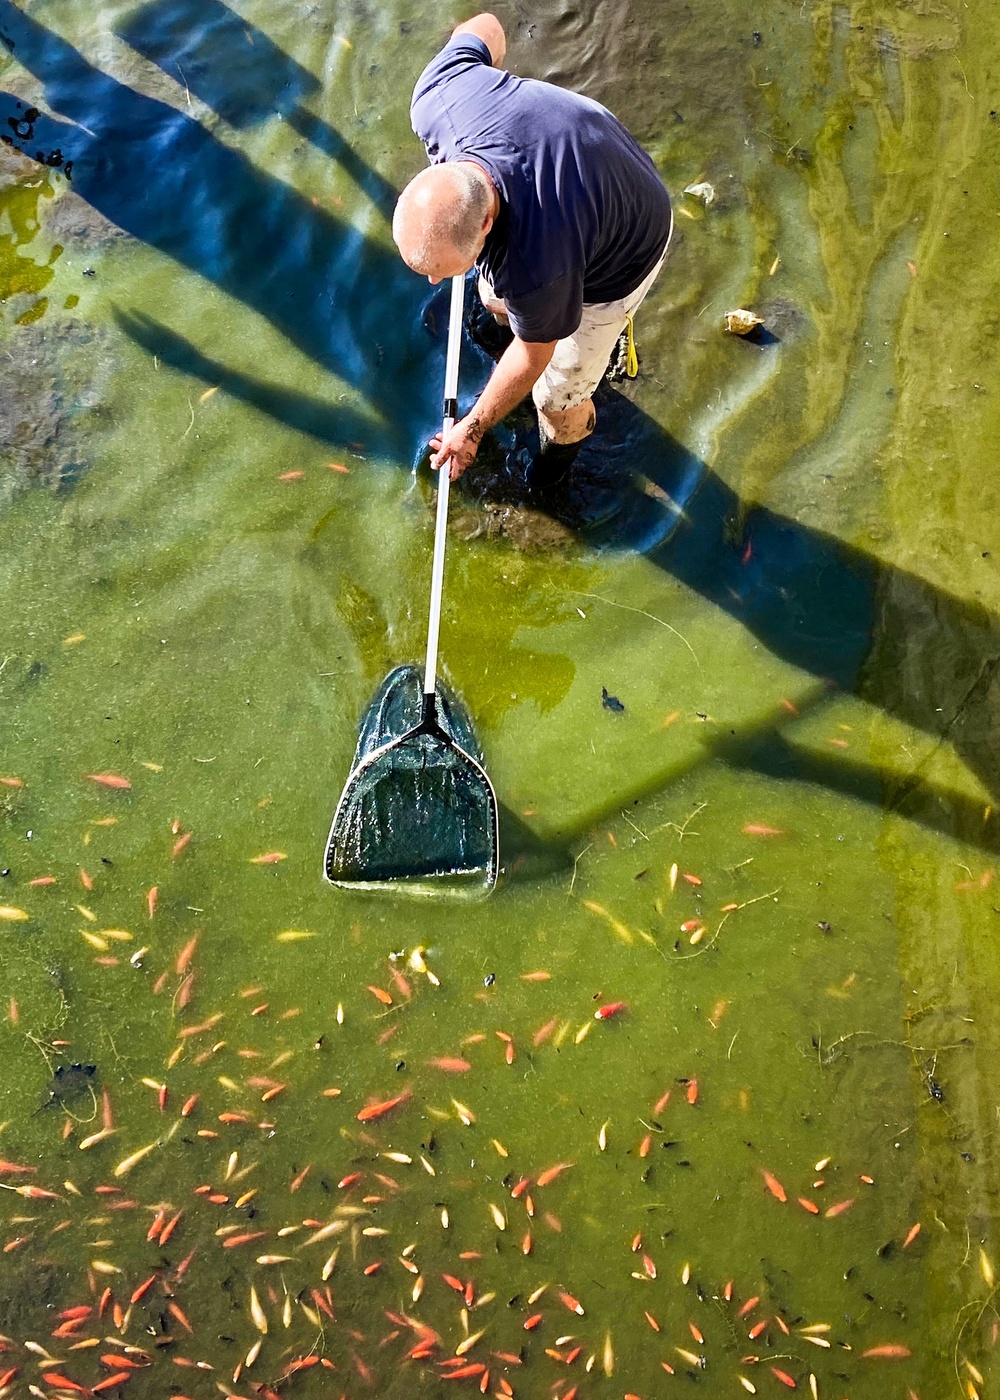 Garrison rescues thousands of goldfish found living at military wash rack